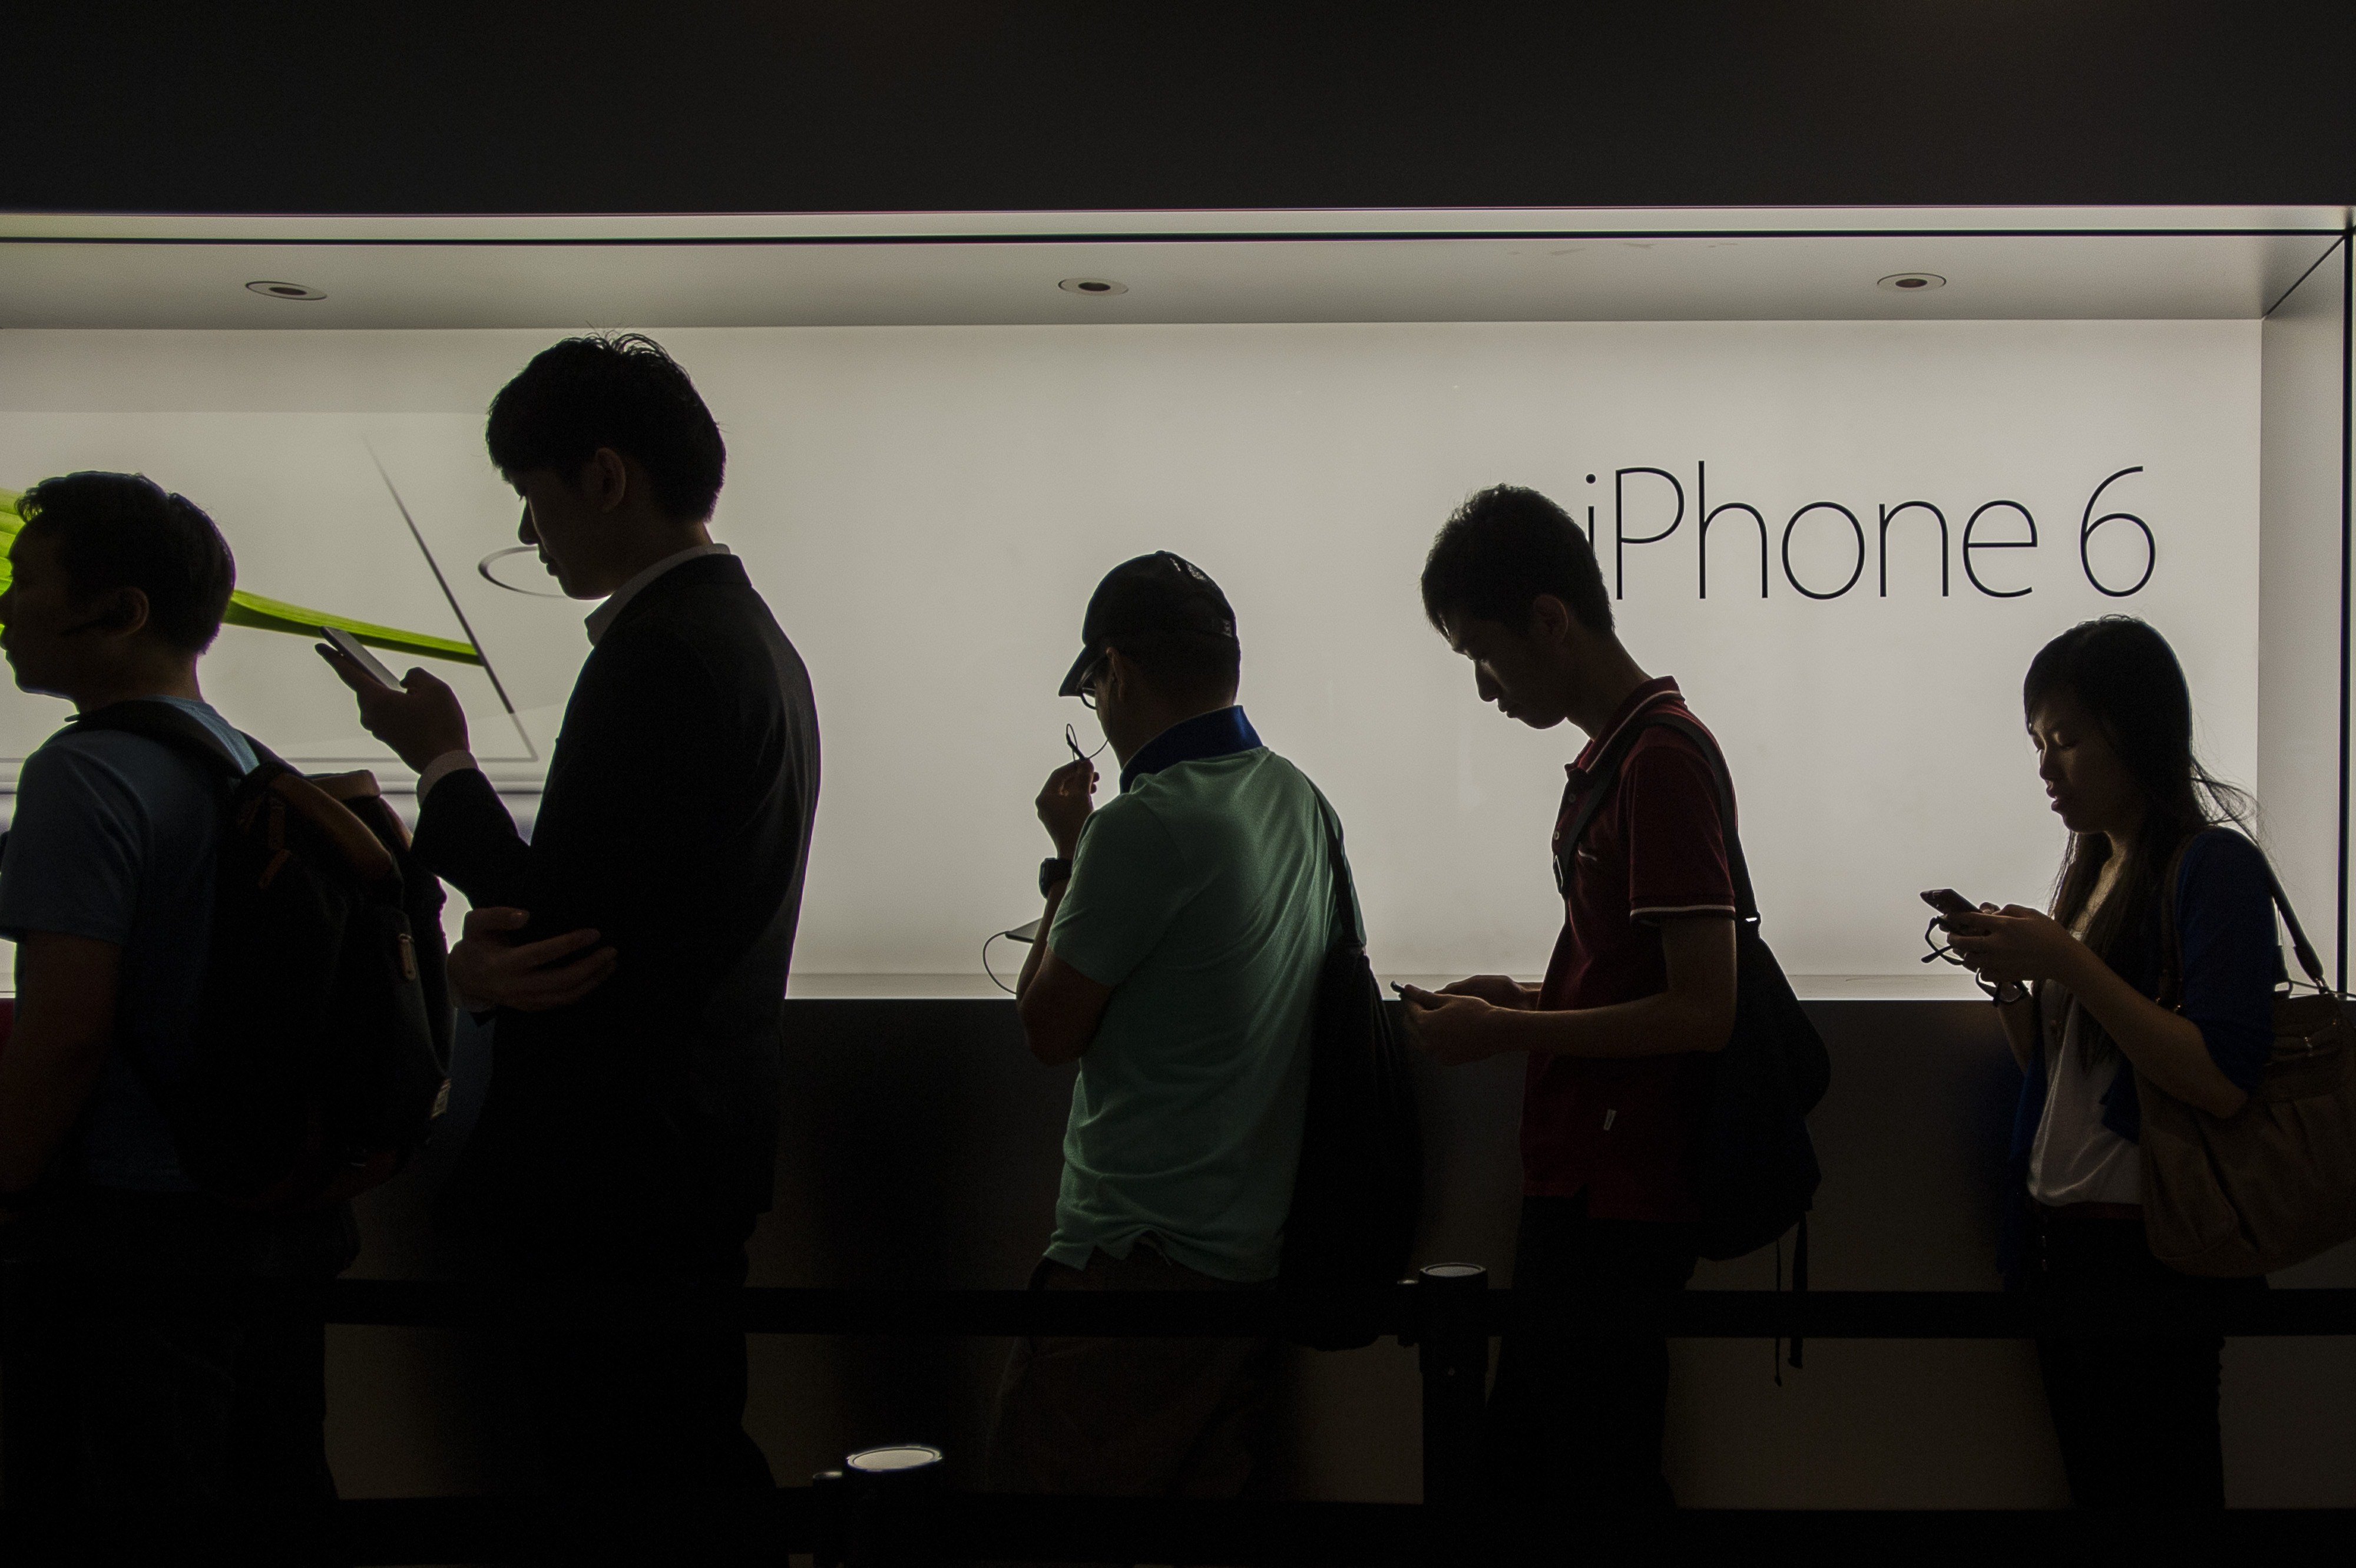 Customers queue outside an Apple store in Hong Kong on Sept. 19, 2014.